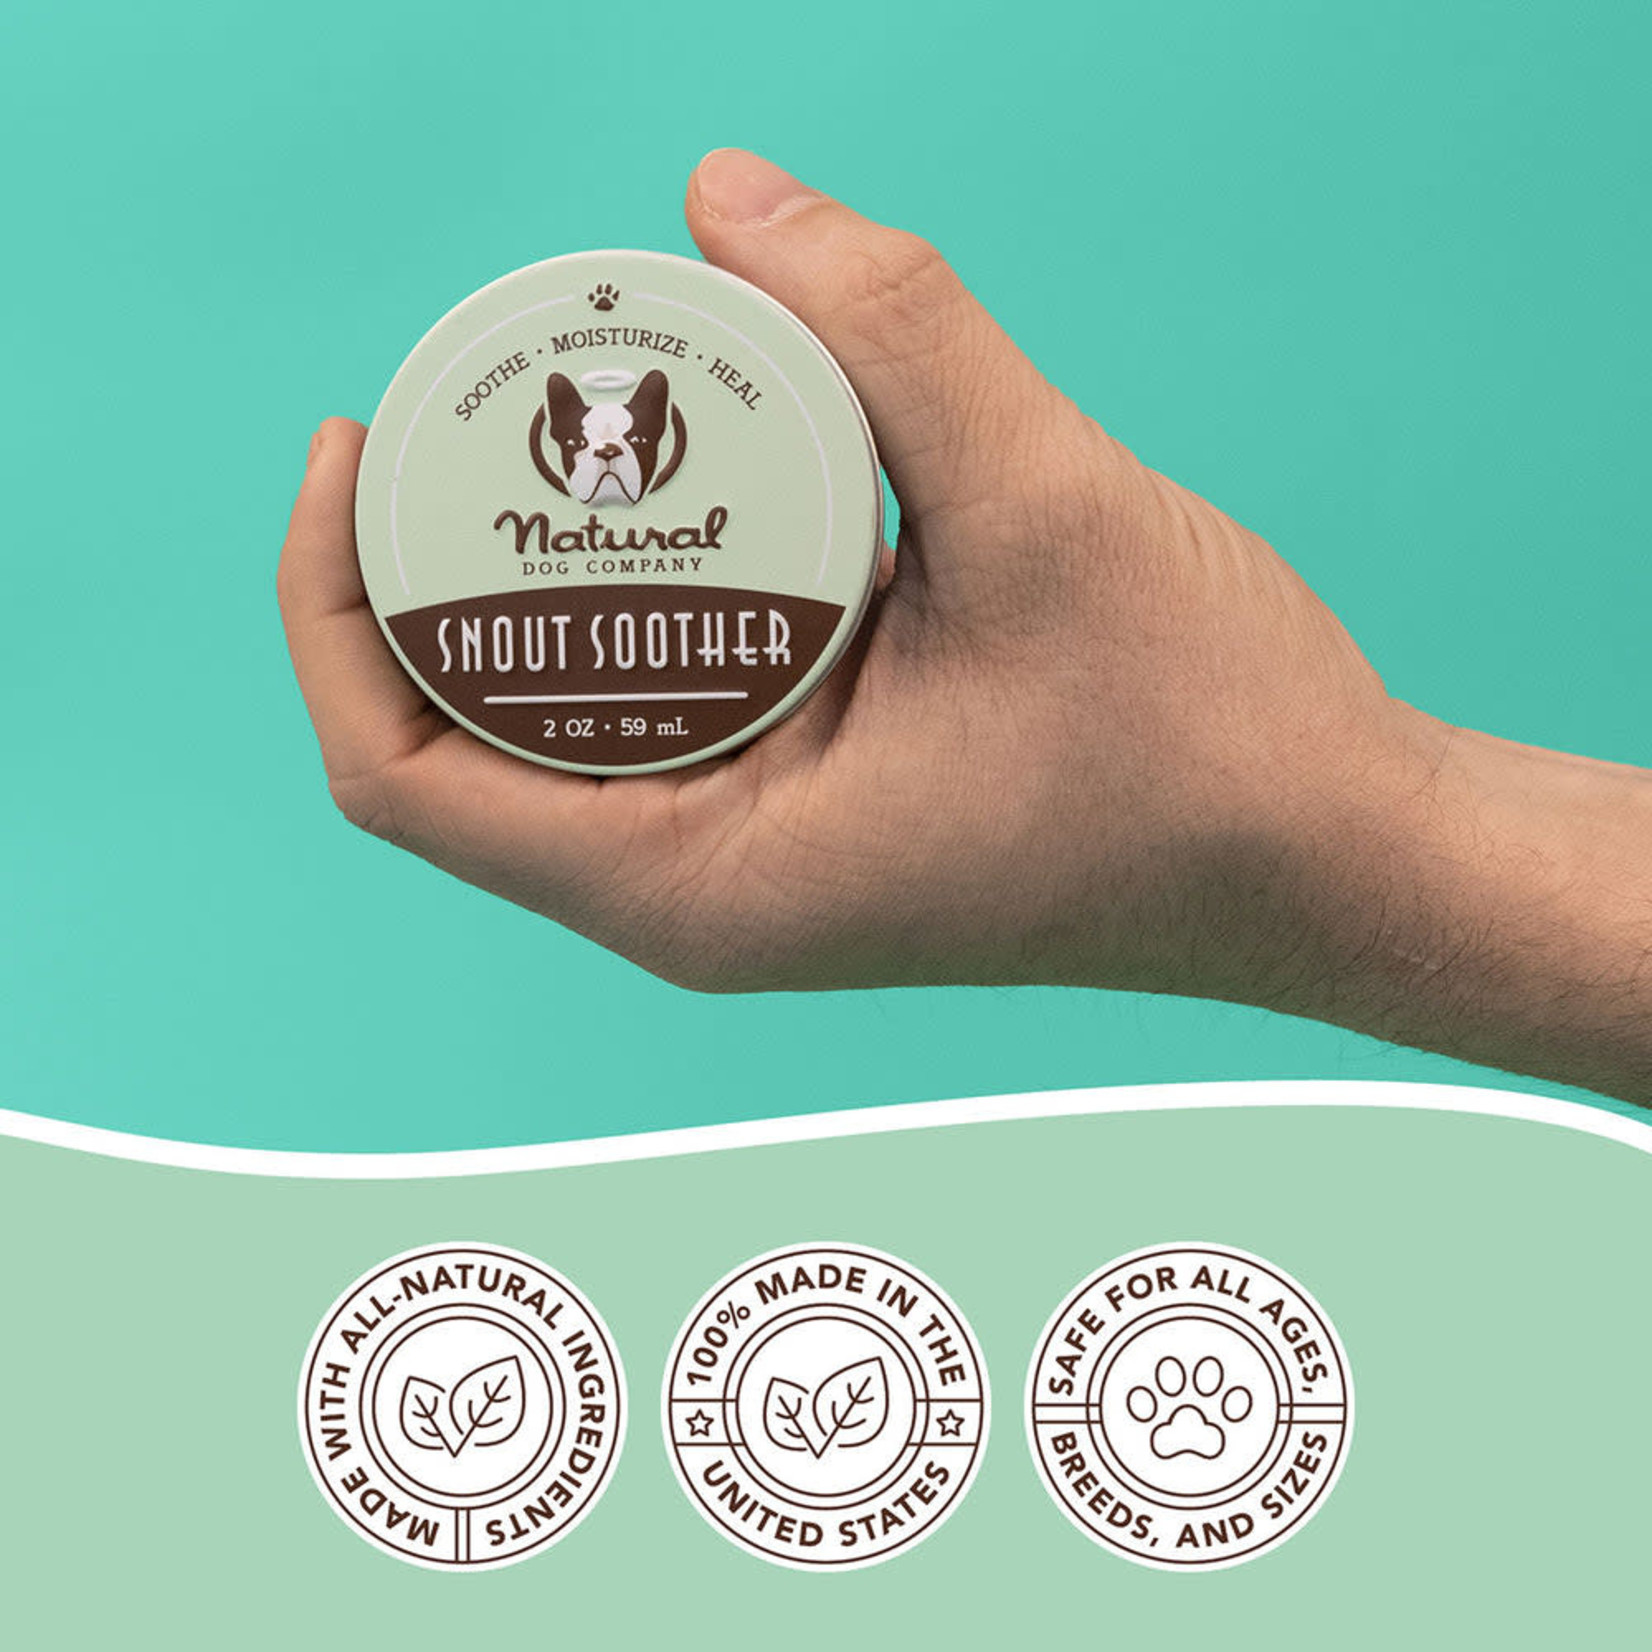 Natural Dog Company Organic Snout Soother Balm for Dogs